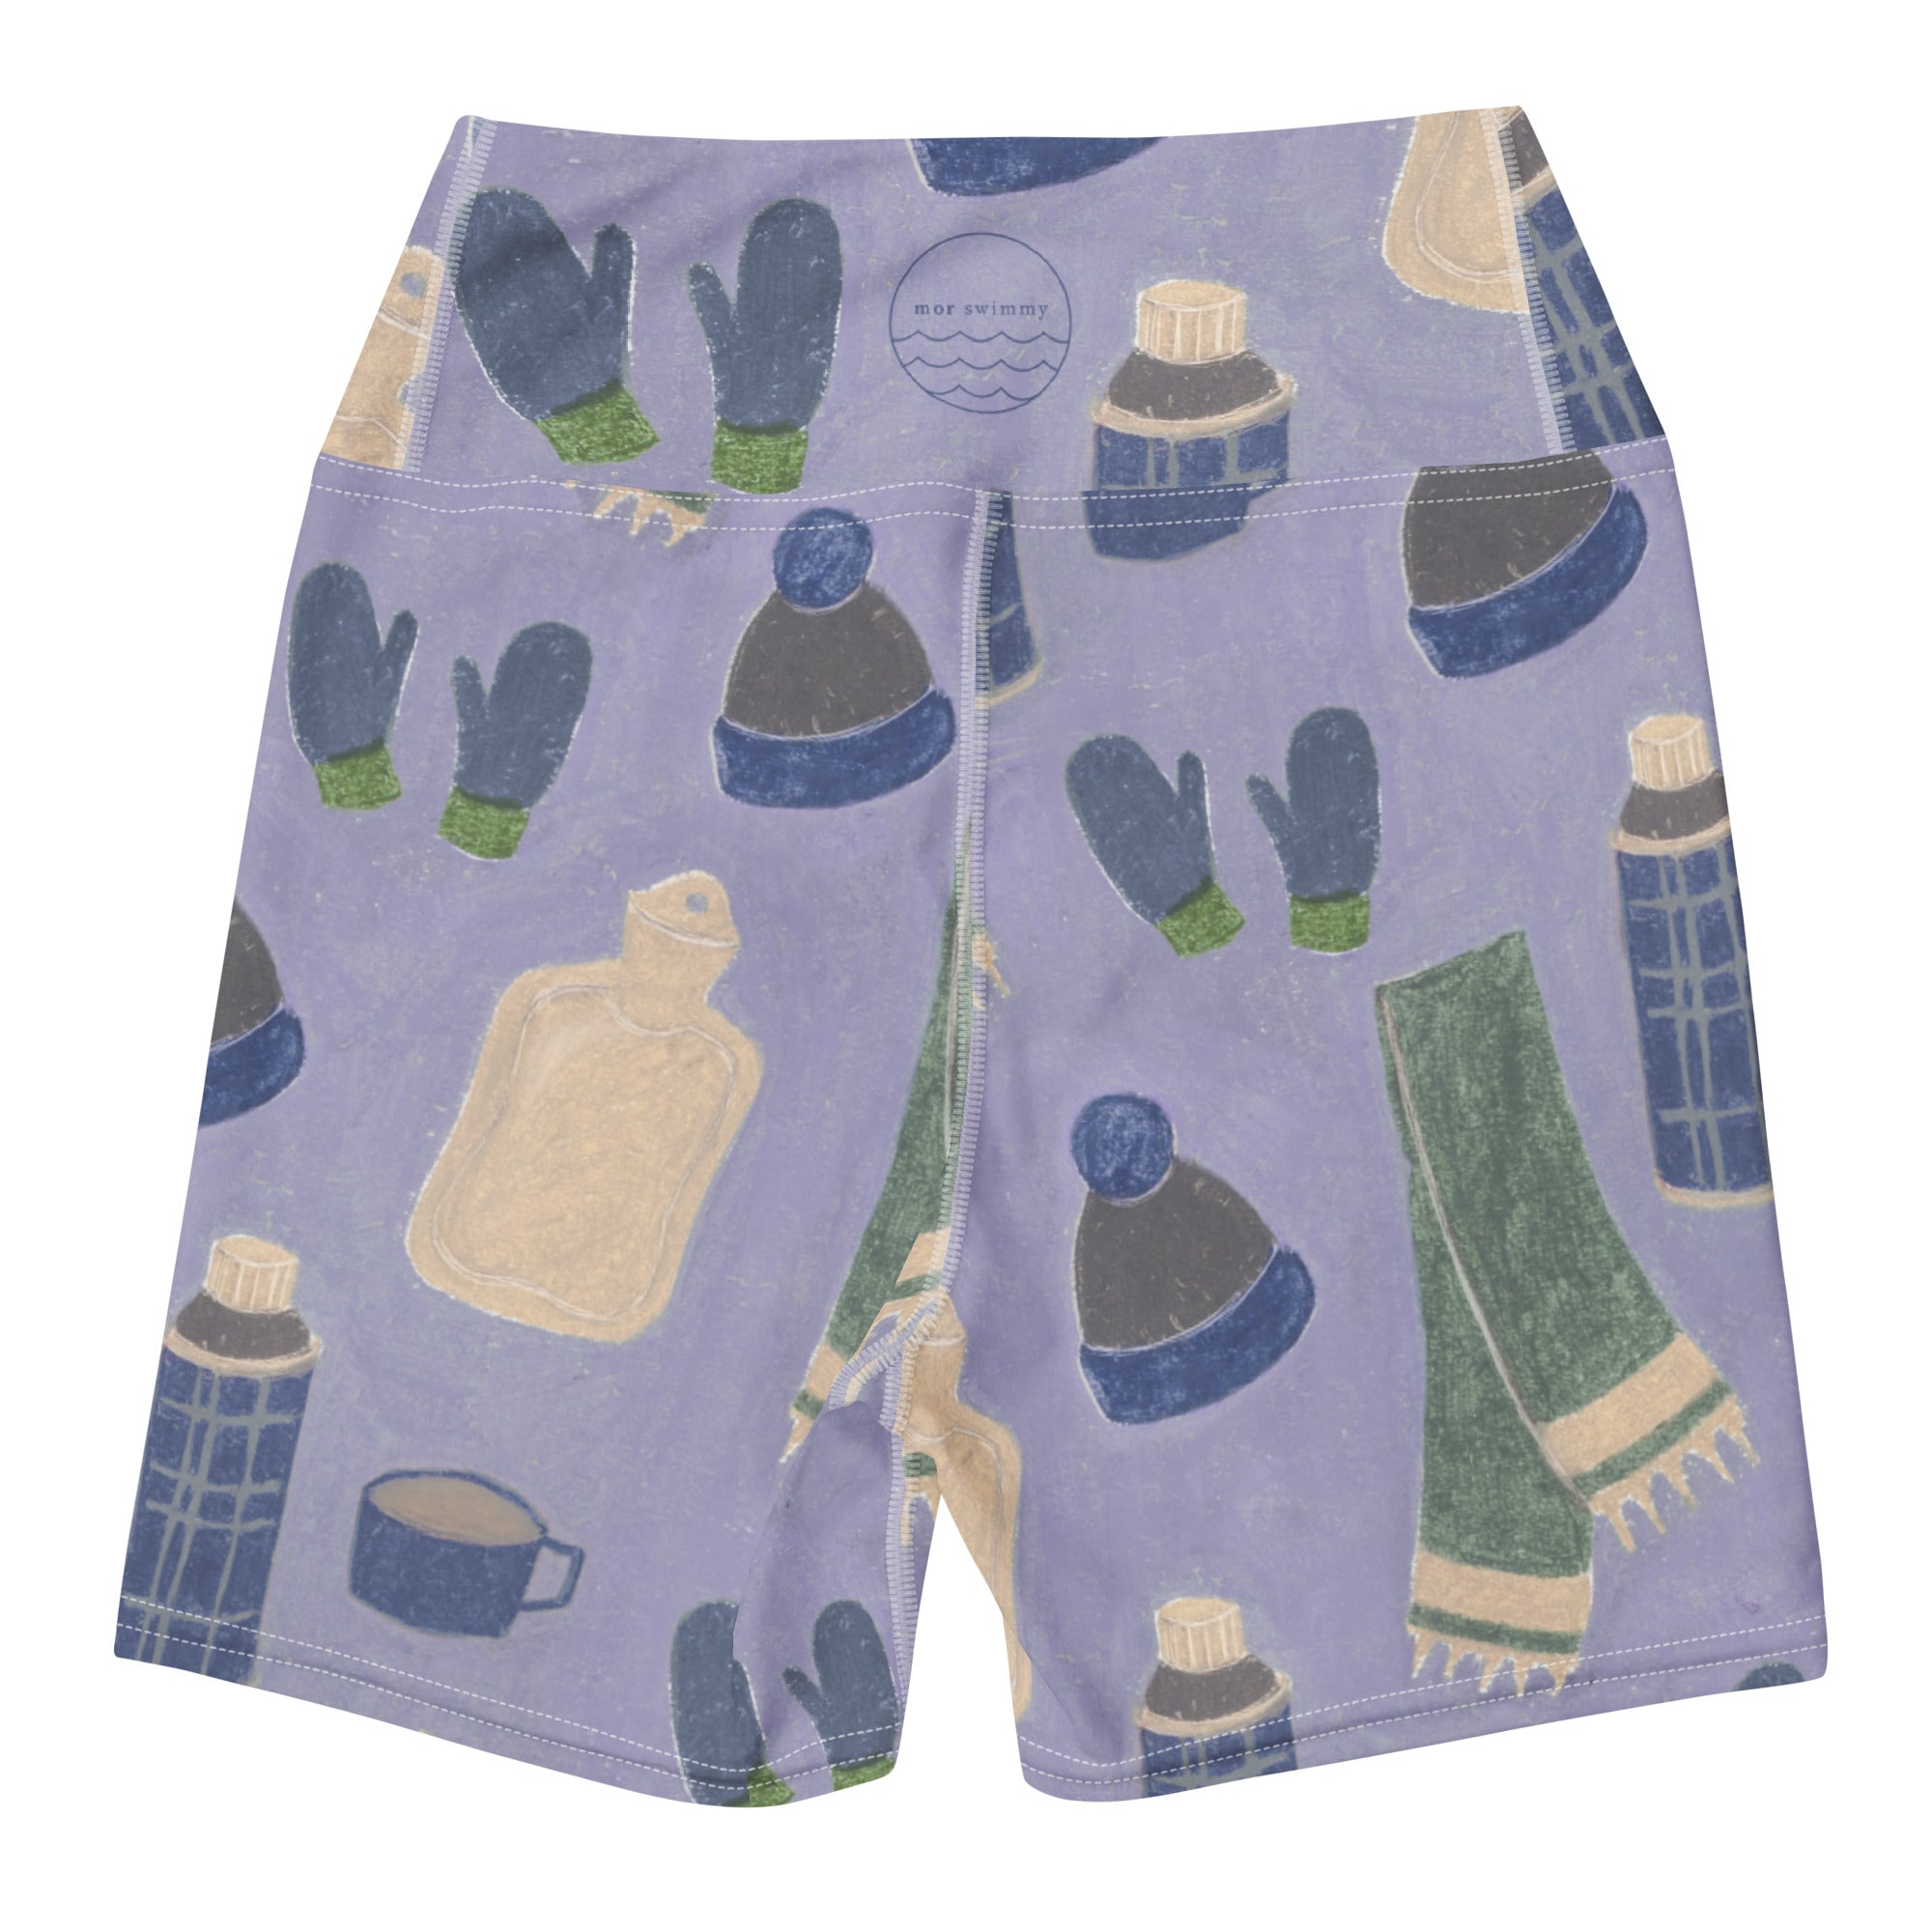 Winter Swim Swim Shorts (Made to order please read the information)